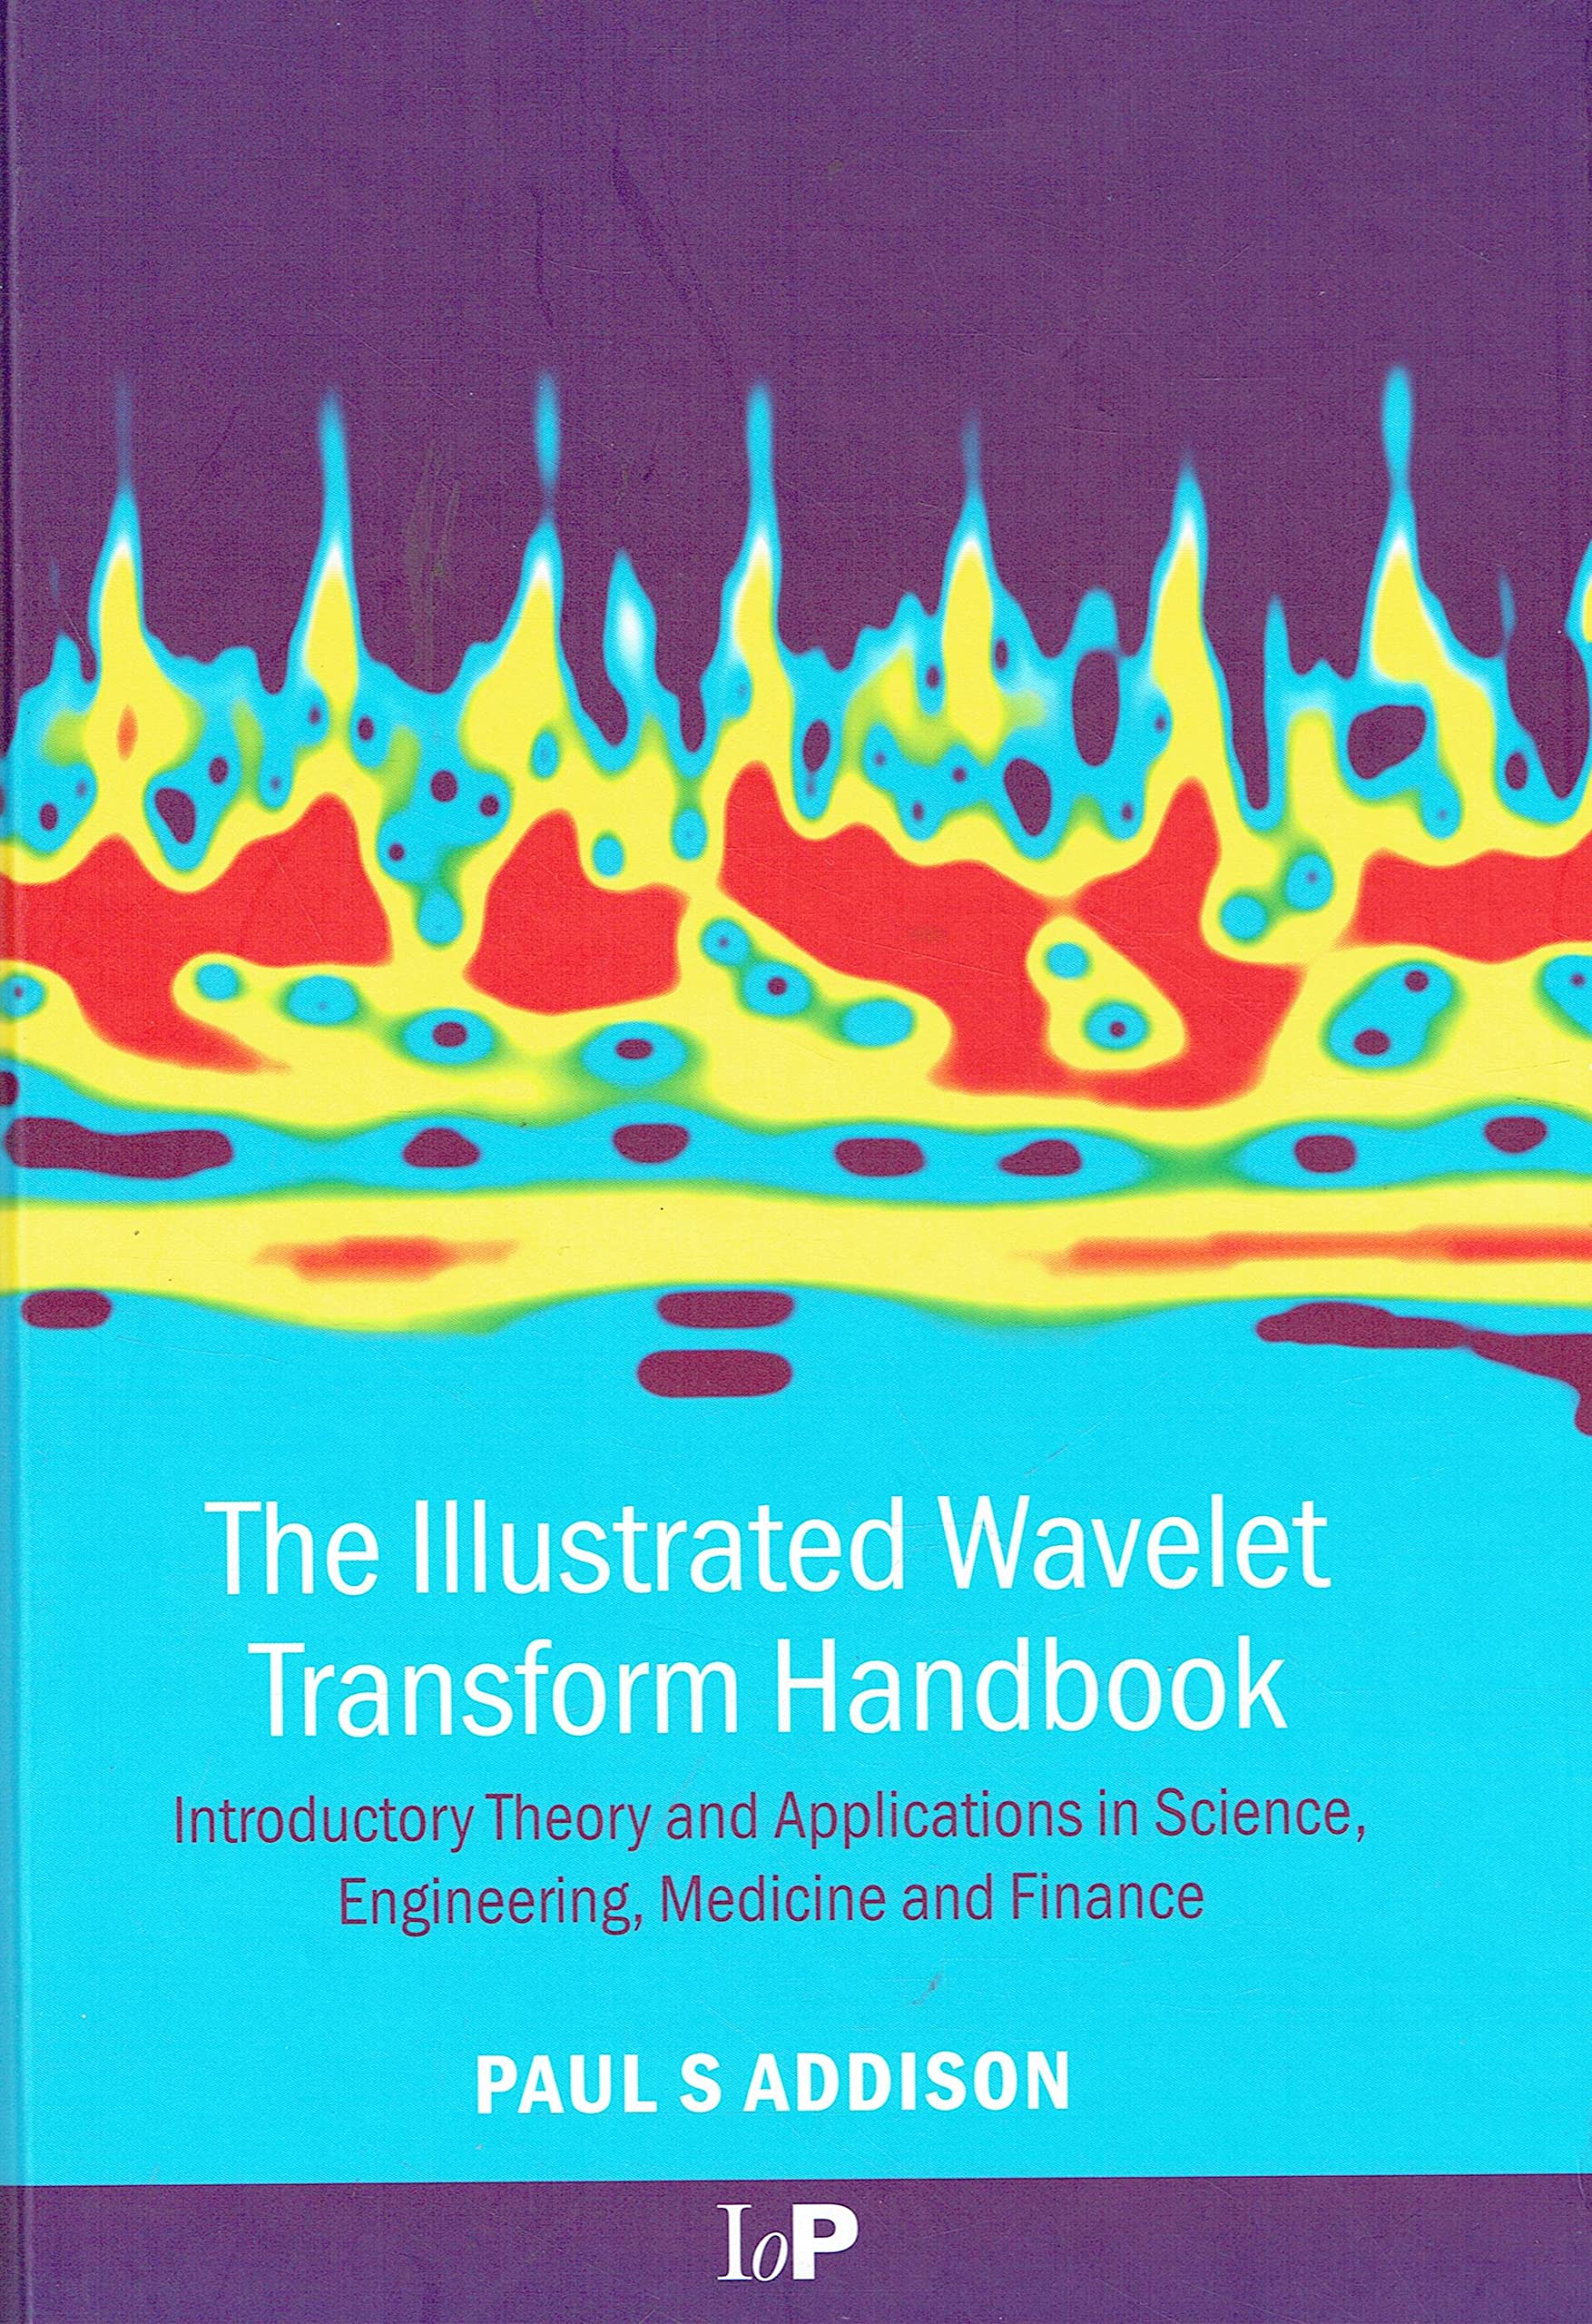 The Illustrated Wavelet Transform Handbook: Introductory Theory and Applications in Science, Engineering, Medicine and Finance - Addison, Paul S